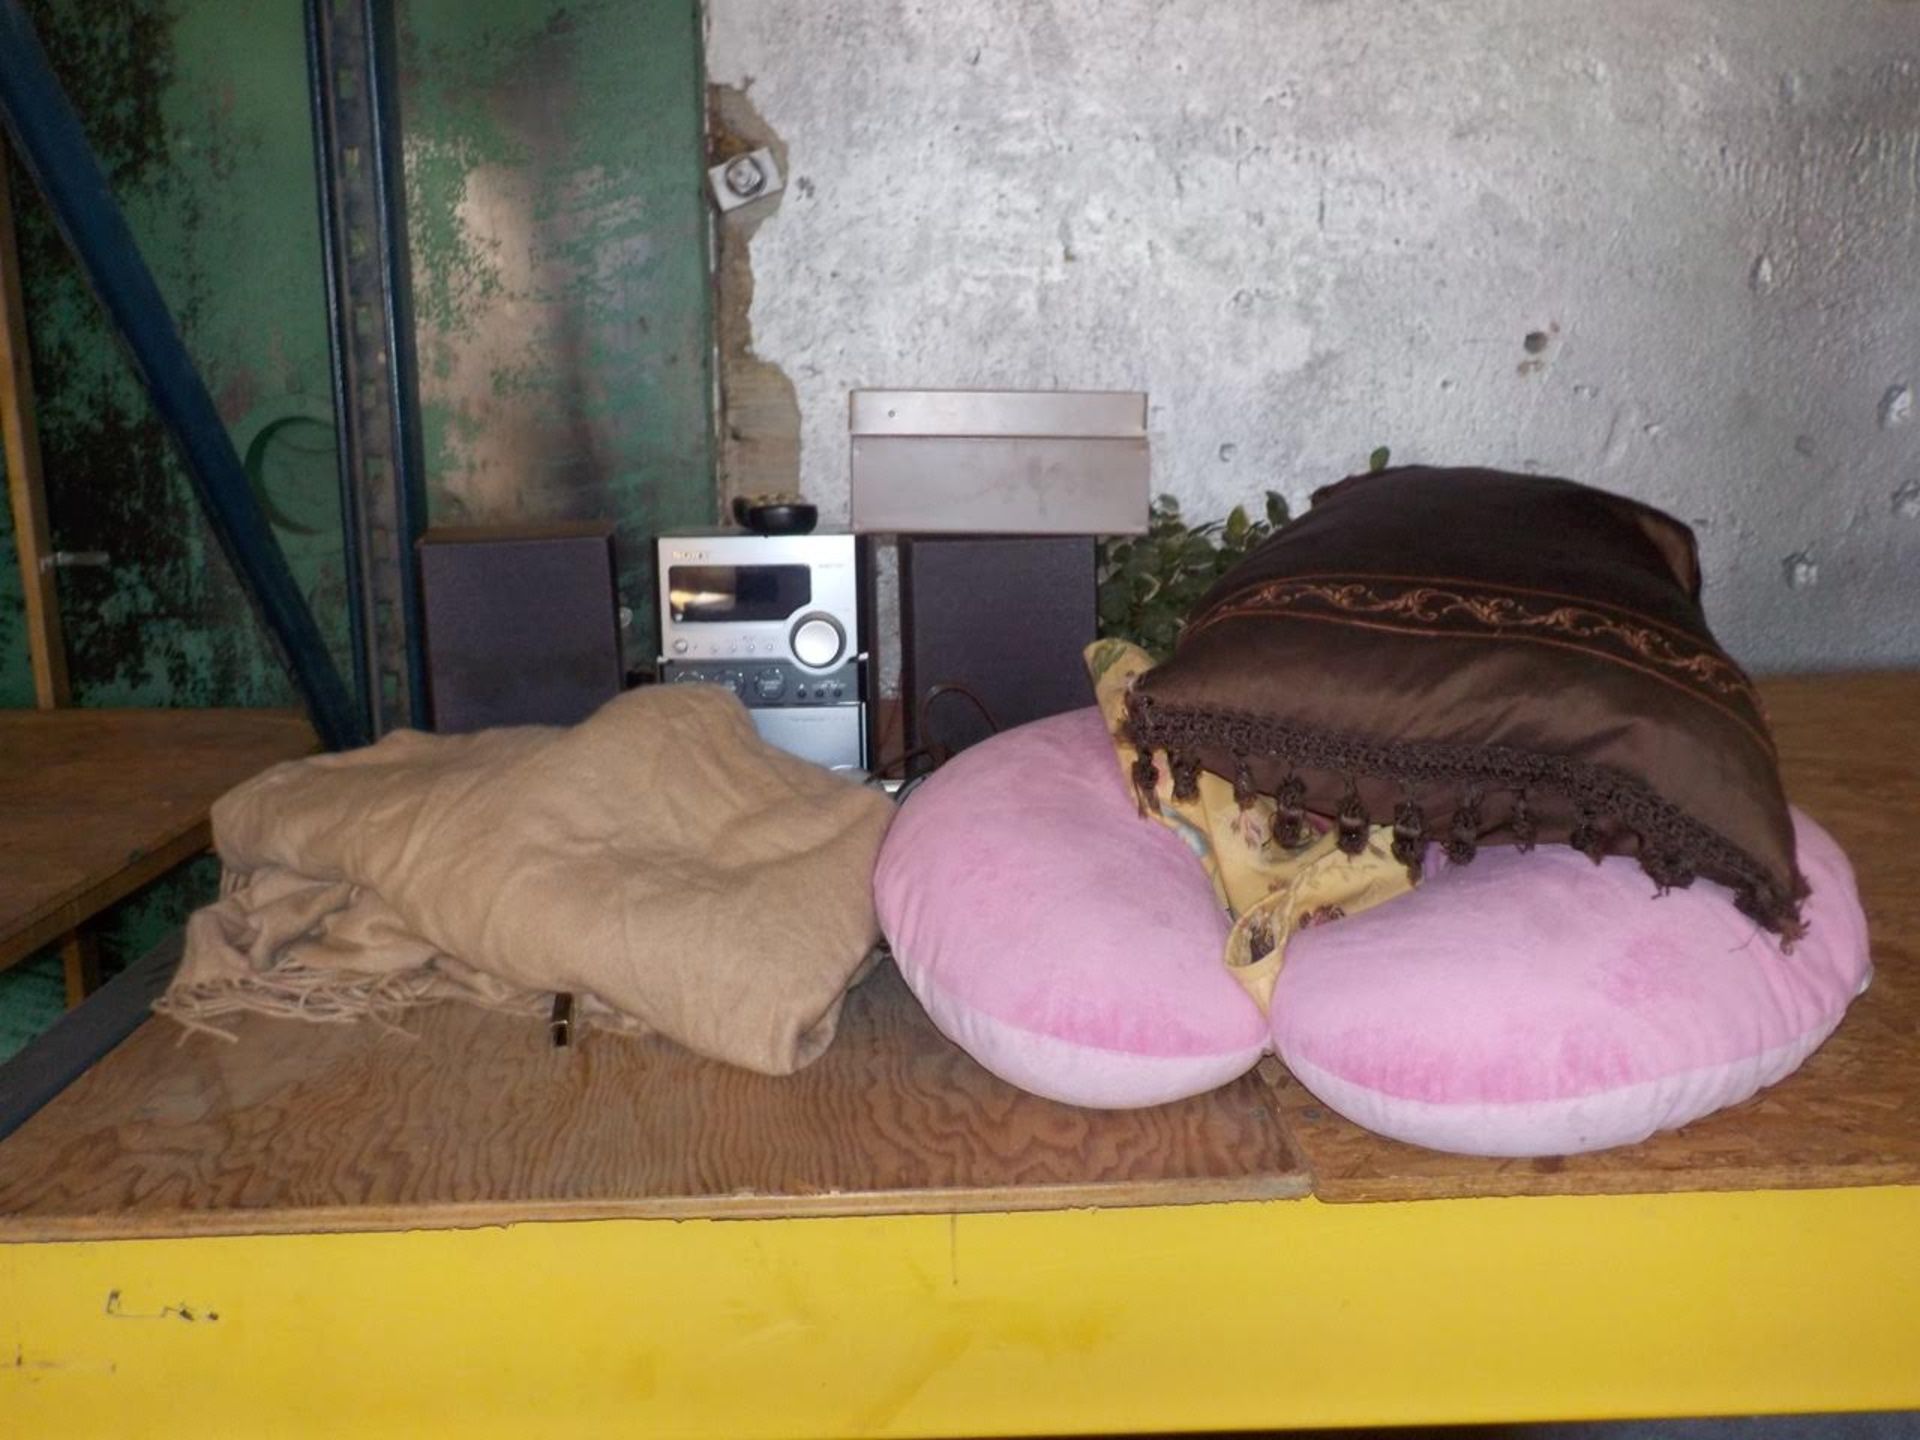 Sony Stereo, Pillows, misc.